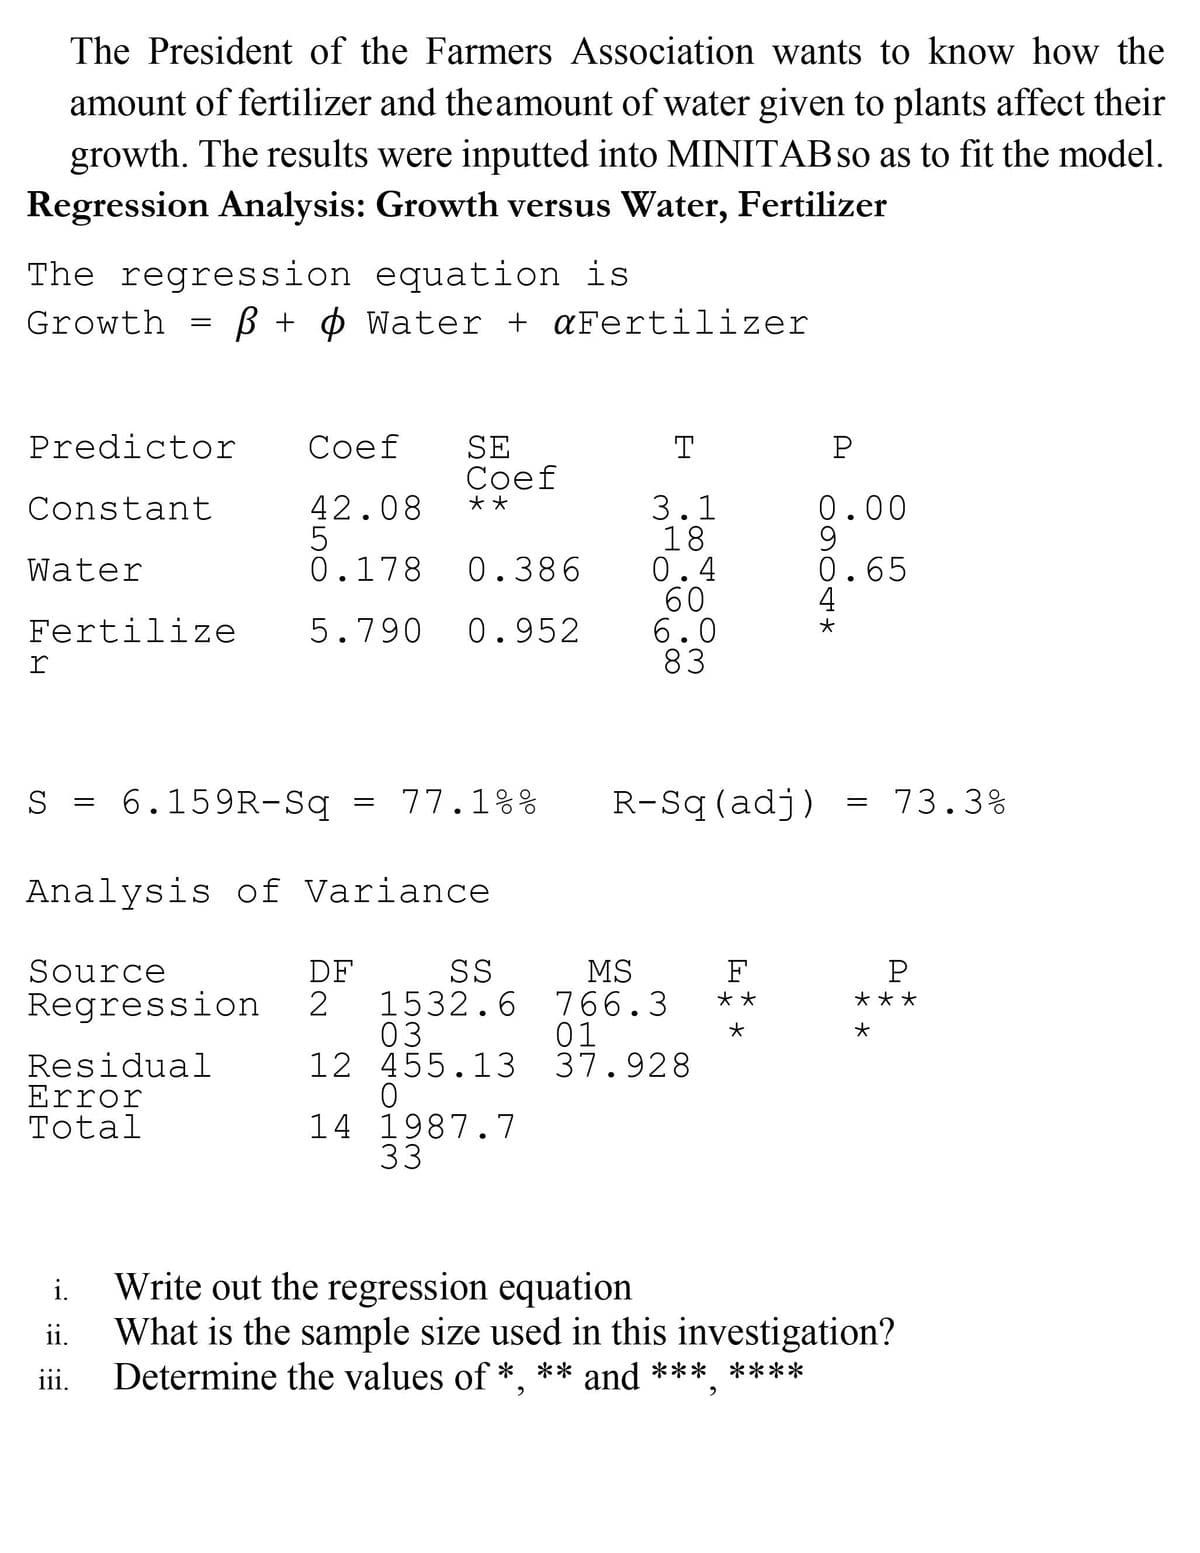 The President of the Farmers Association wants to know how the
amount of fertilizer and the amount of water given to plants affect their
growth. The results were inputted into MINITABSO as to fit the model.
Regression Analysis: Growth versus Water, Fertilizer
The regression equation is
Growth
B + ¢ Water + aFertilizer
Predictor
Соef
SE
Соef
T
P
42.08
3.1
18
0.4
60
6.0
83
Constant
**
0.00
0.386
0.65
4
Water
0.178
Fertilize
5.790
0.952
r
S
6.159R-Sg
77.1%%
R-Sq(adj)
73.3%
Analysis of Variance
Source
DF
SS
MS
F
P
1532.6 766.3
03
12 455.13 37.928
**
***
Regression
01
Residual
Error
Total
14 1987.7
33
Write out the regression equation
What is the sample size used in this investigation?
Determine the values of *, ** and *** ****
i.
ii.
iii.
